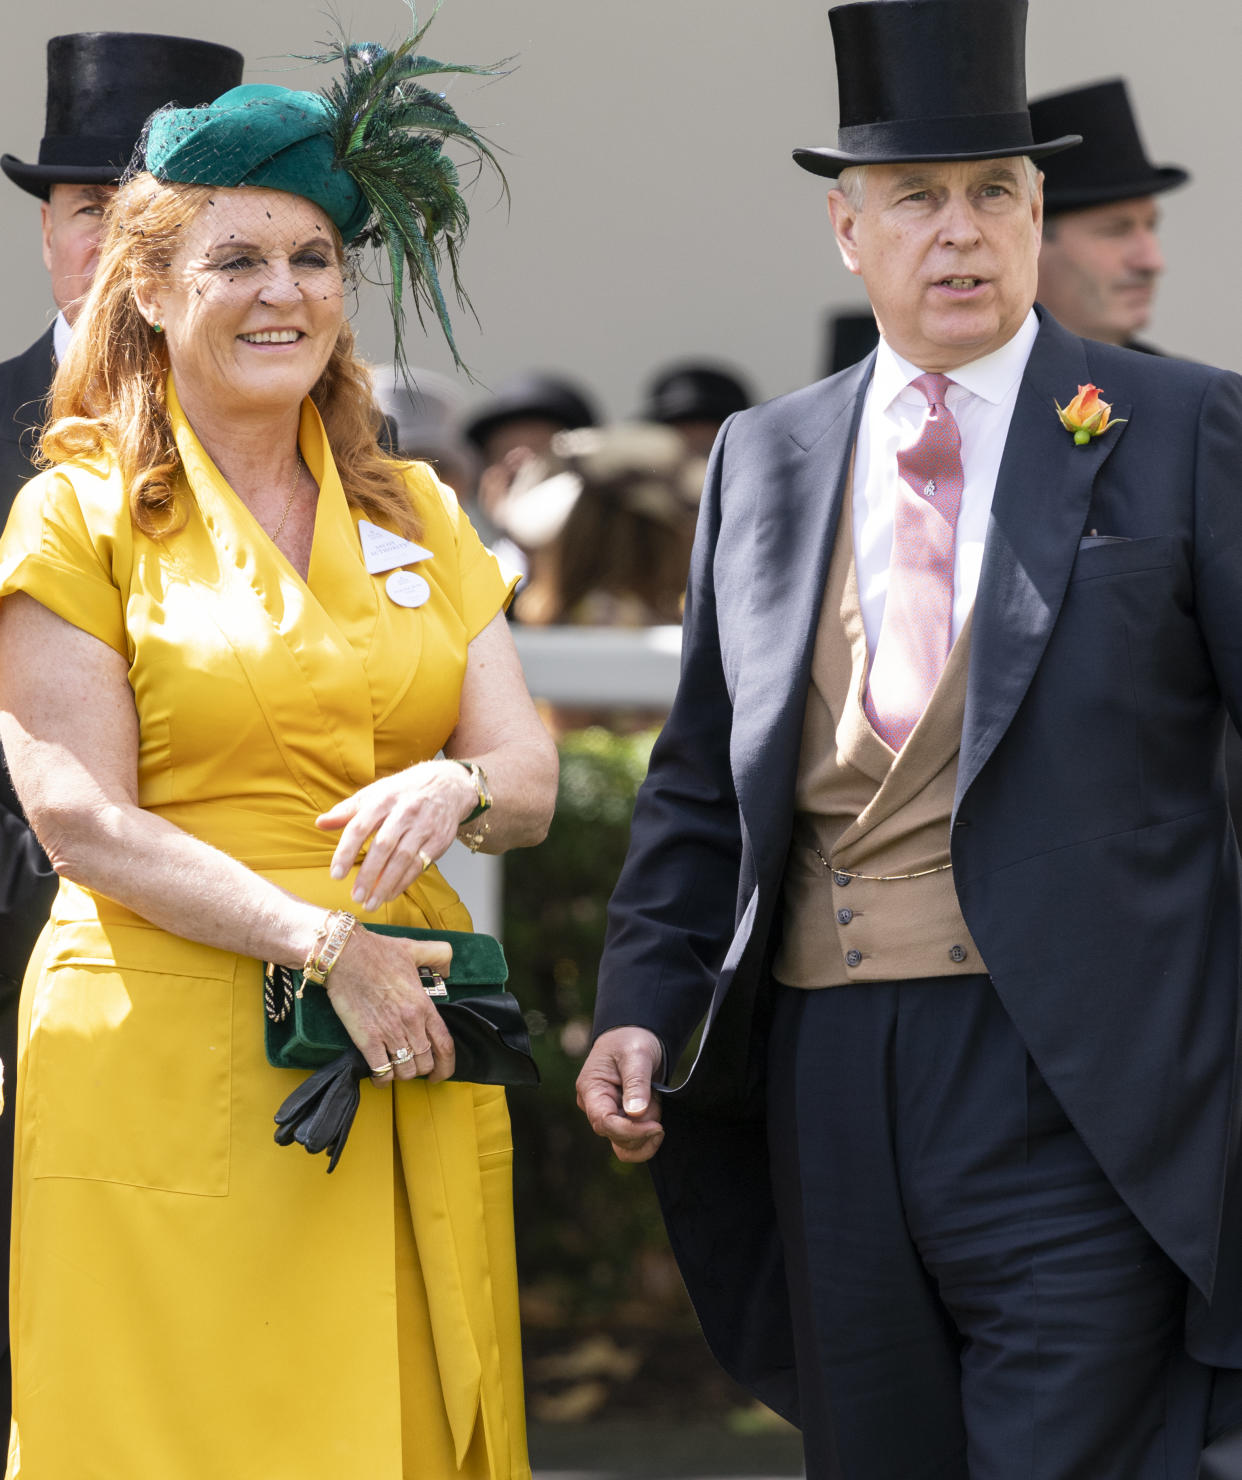 Prince Andrew, Duke of York and Sarah Ferguson, Duchess of York on day four of Royal Ascot at Ascot Racecourse on June 21, 2019